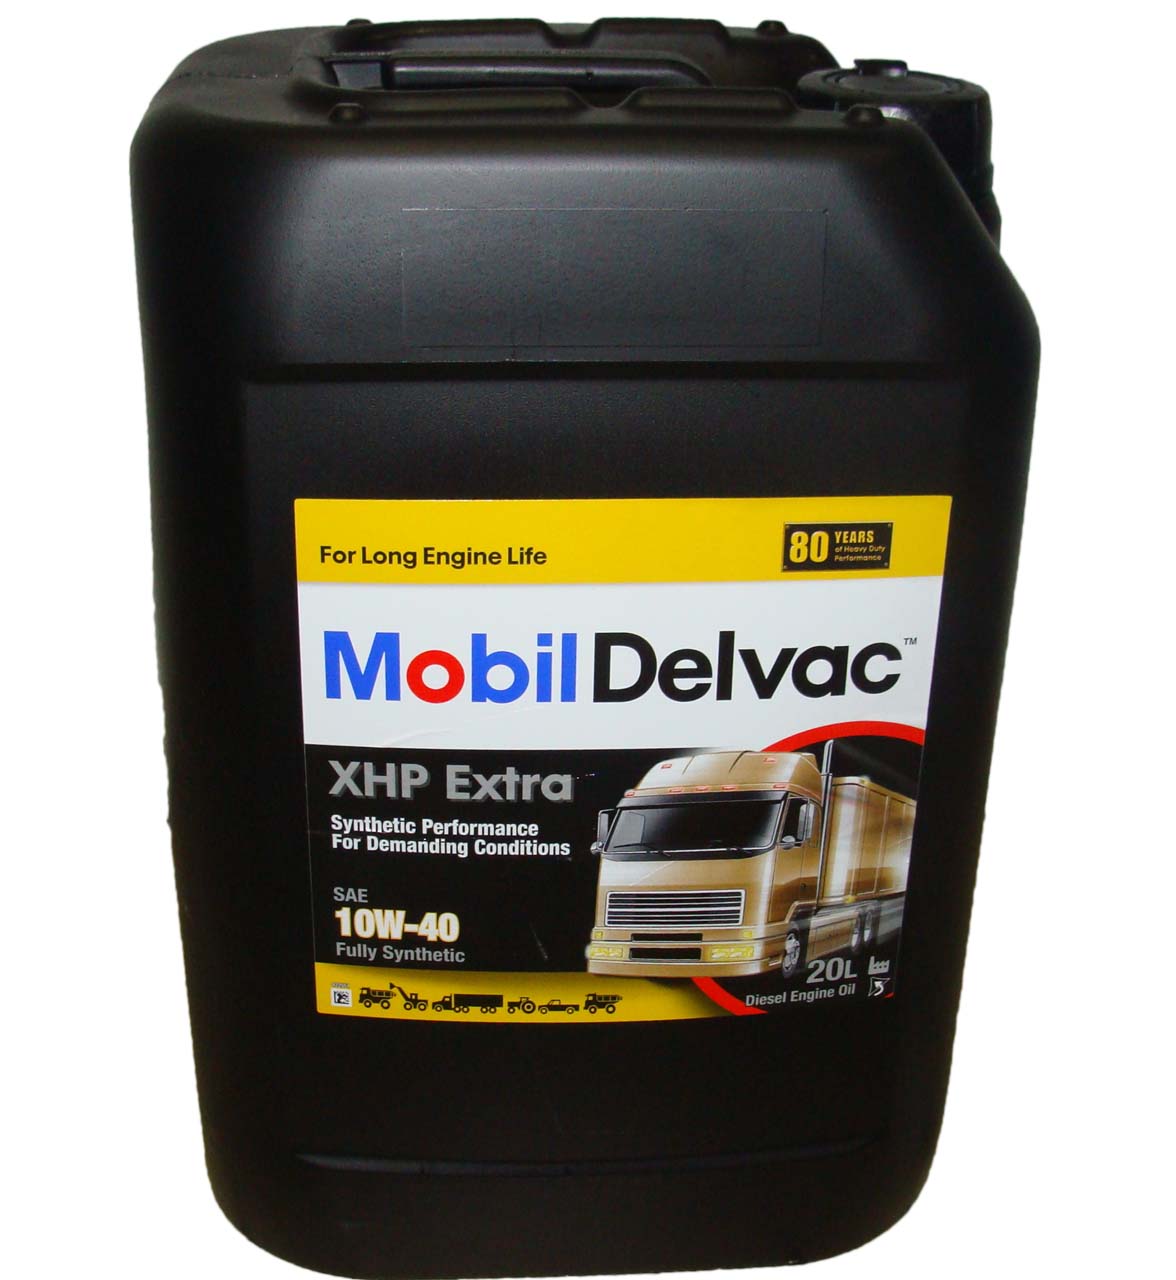 Масло mobil 10w40. Mobil масло Delvac XHP Extra 10w40 20л. Мобил Делвак 10w 40 XHP Extra. Мобил XHP Extra 10w-40. Масло моторное mobil Delvac XHP Extra 10w 40 синтетическое 20 л 152712.